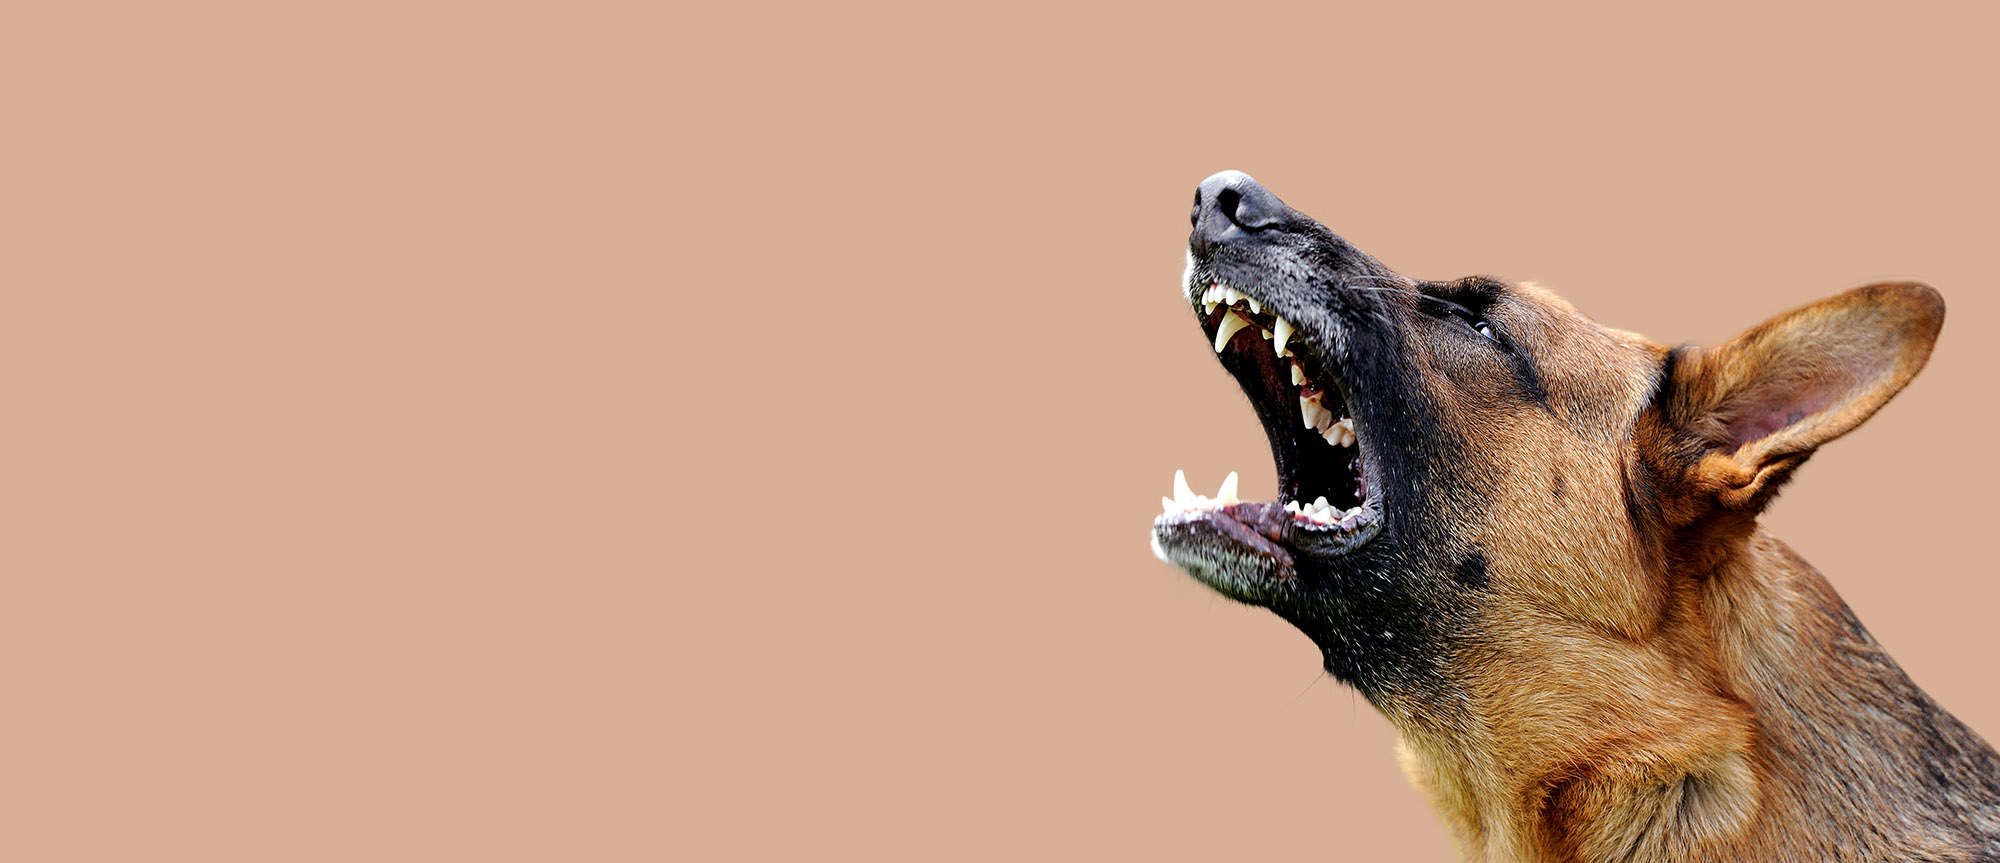 dangerous dog bite attack personal injury solicitors Aberdeen